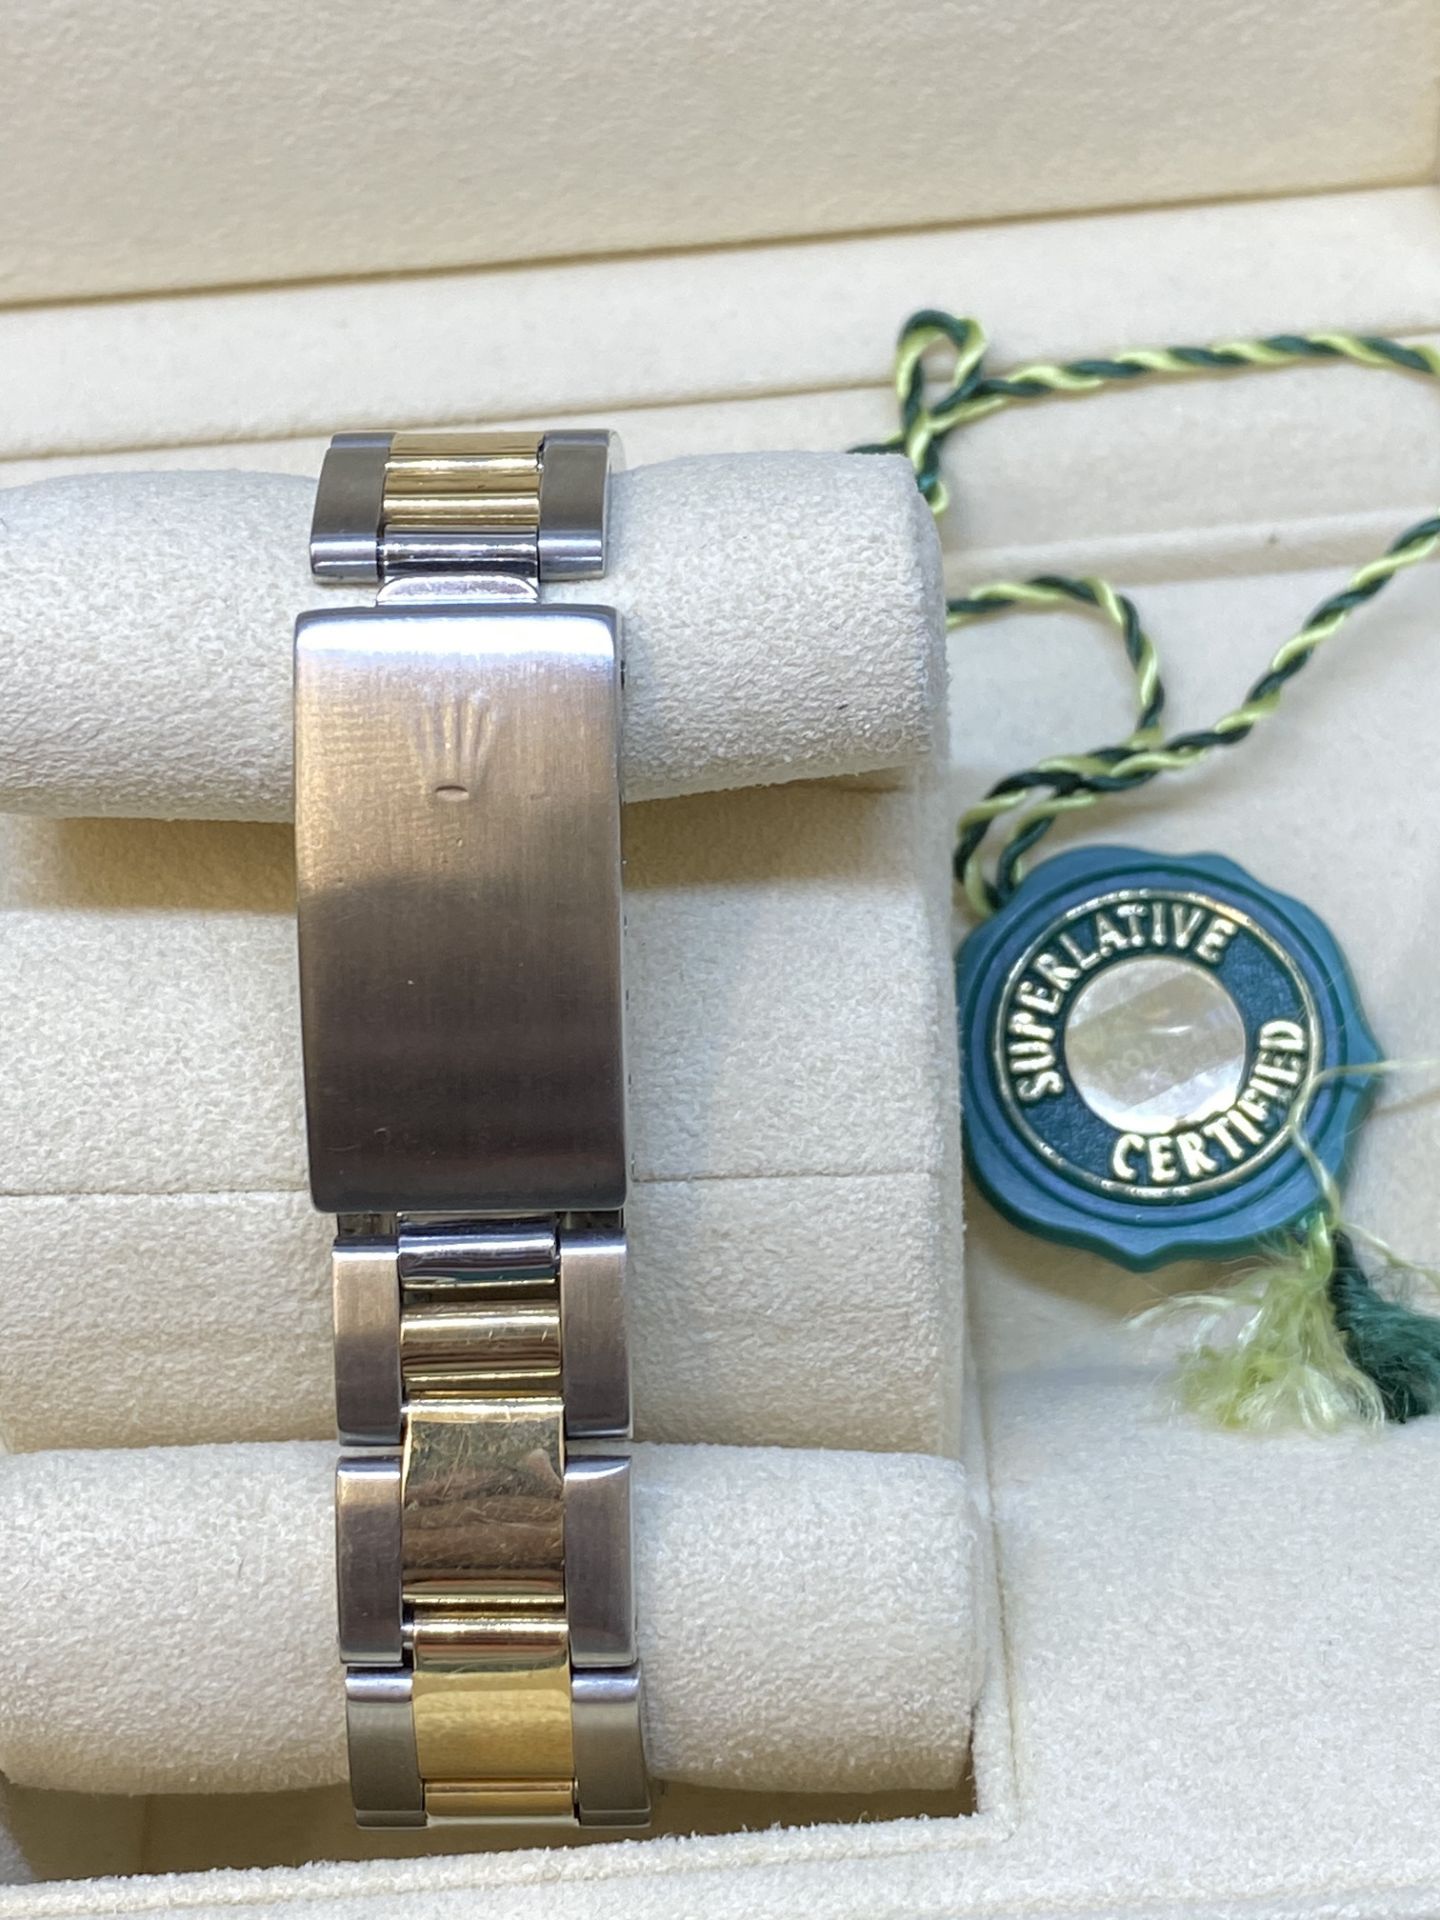 Rolex Steel & Gold Midsize Watch with Box - Image 7 of 10